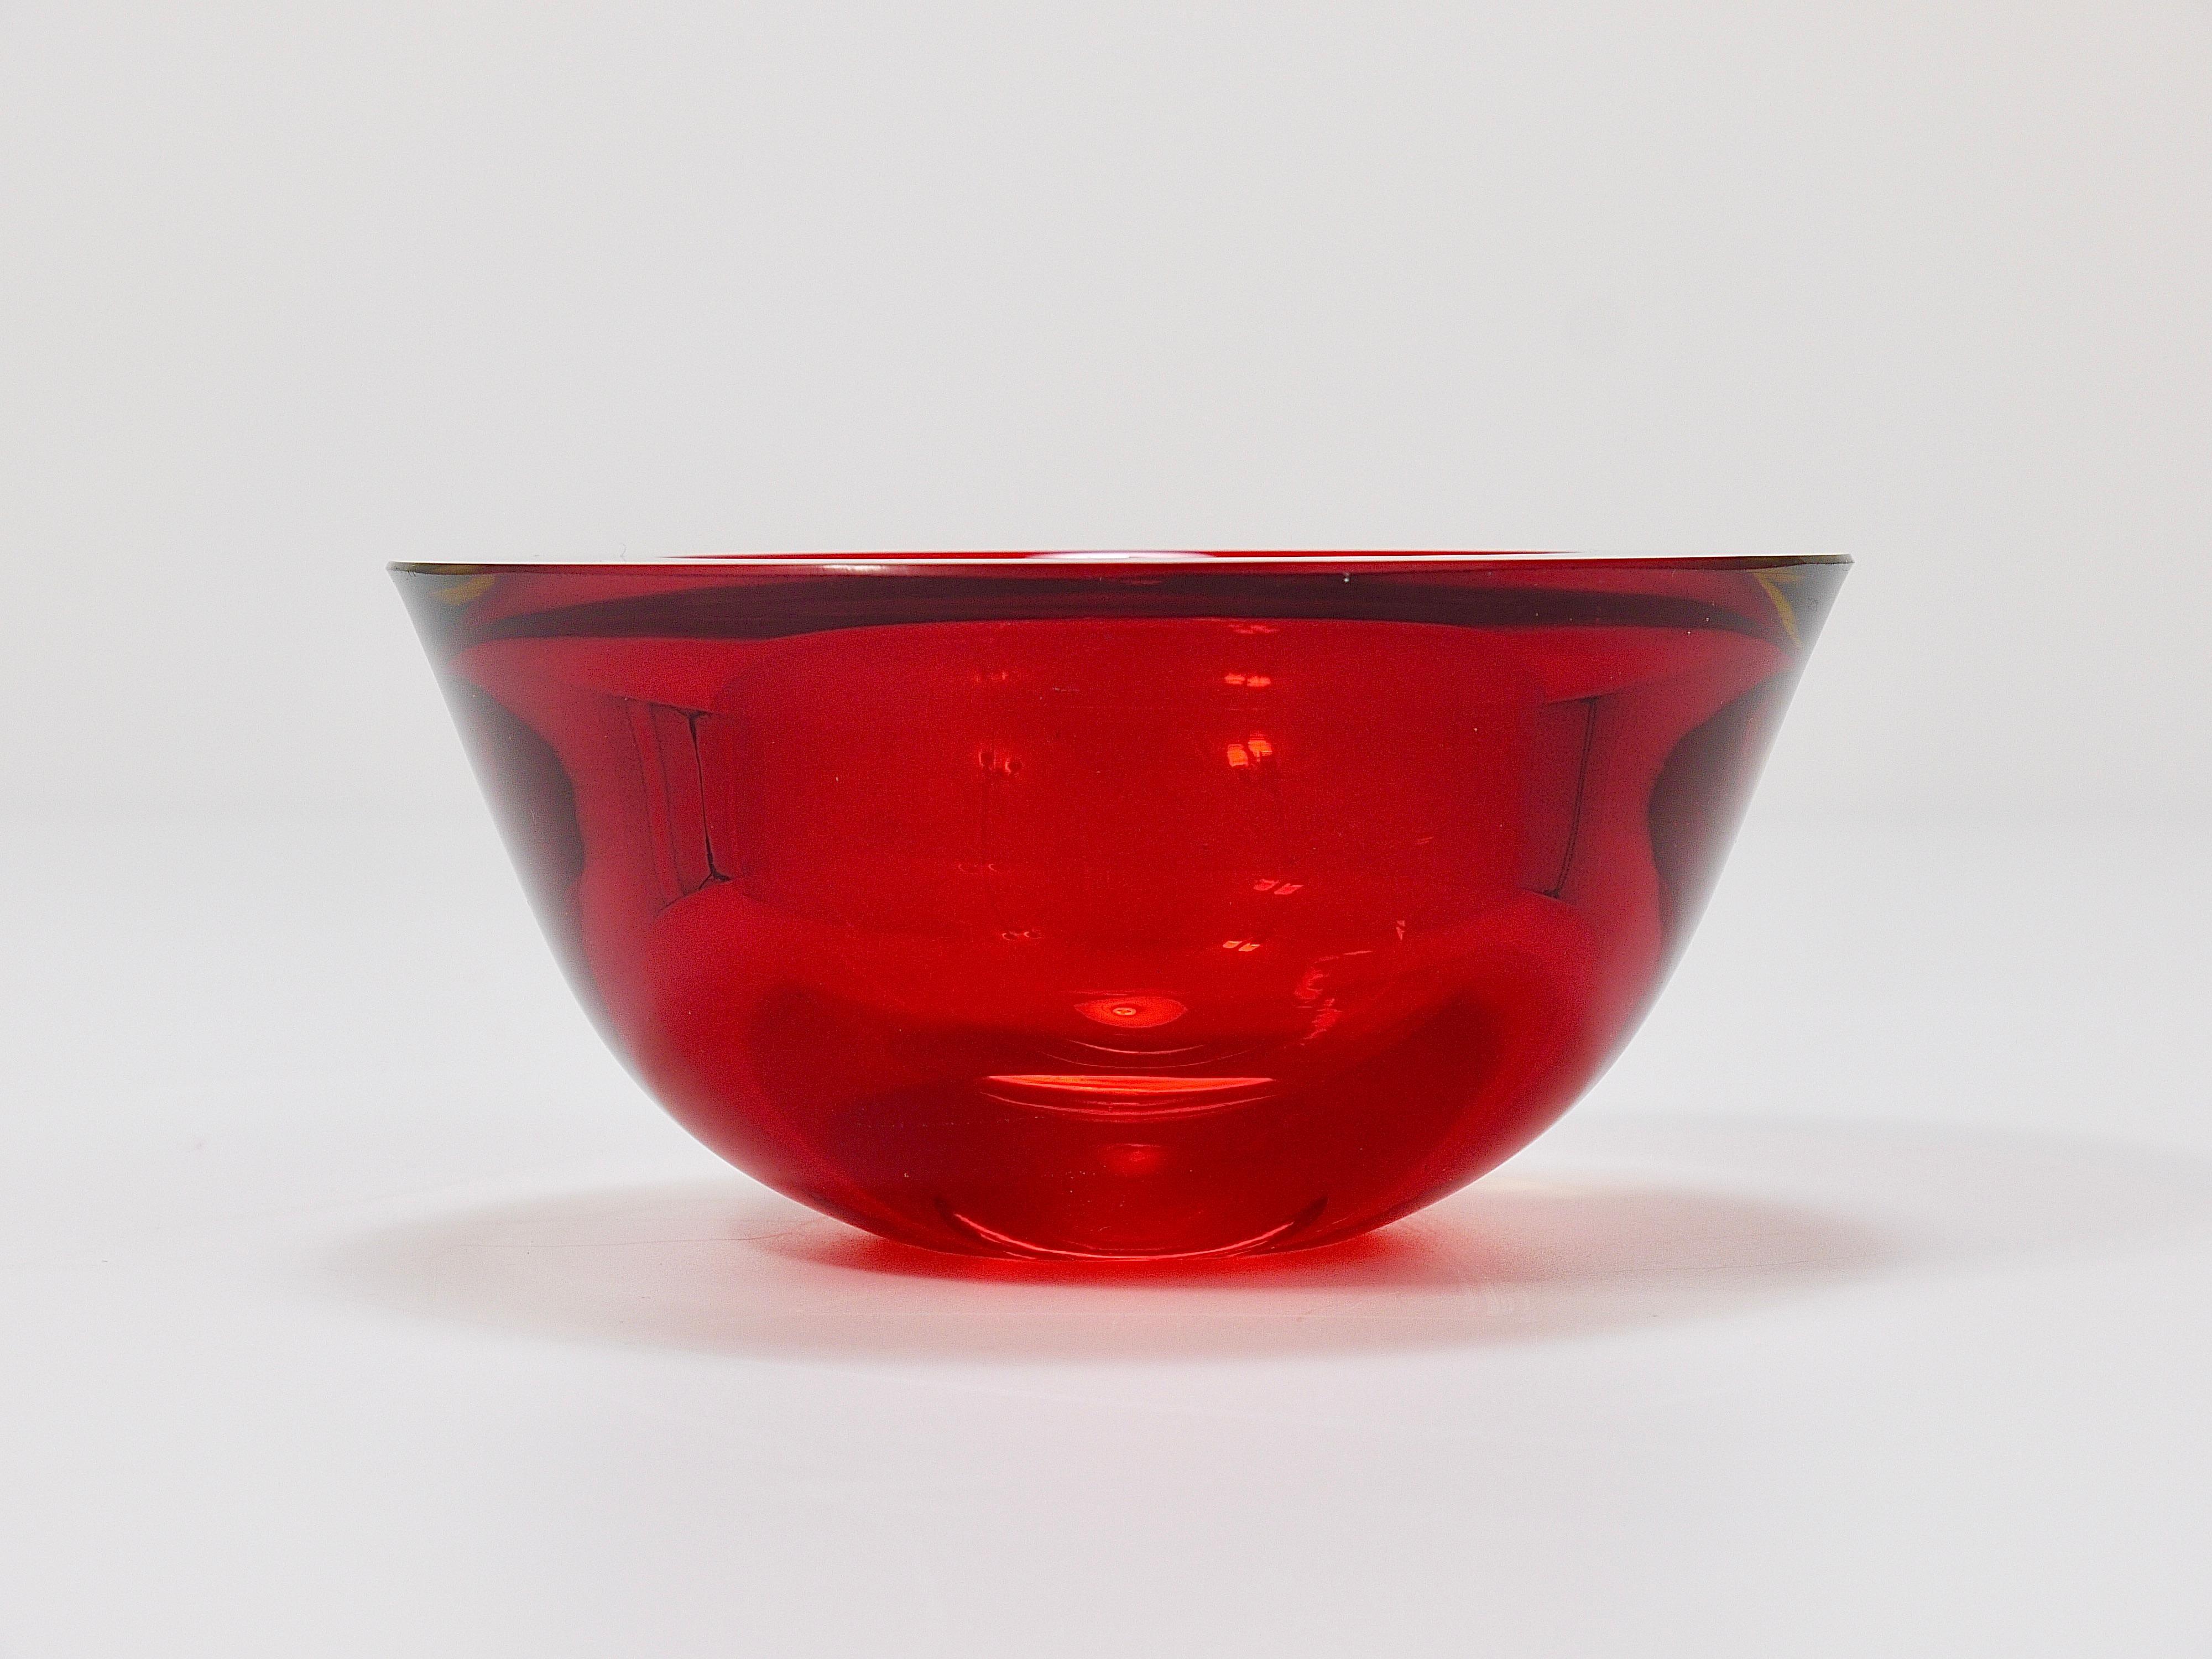 A beautiful Murano Sommerso technique art glass bowl from the 1960s, designed by Flavio Poli, hand-blown by Seguso Vetri d'Arte, Italy. A stunning and rich color combination of light-blue / turquoise, yellow and red layered art glass. A decorative